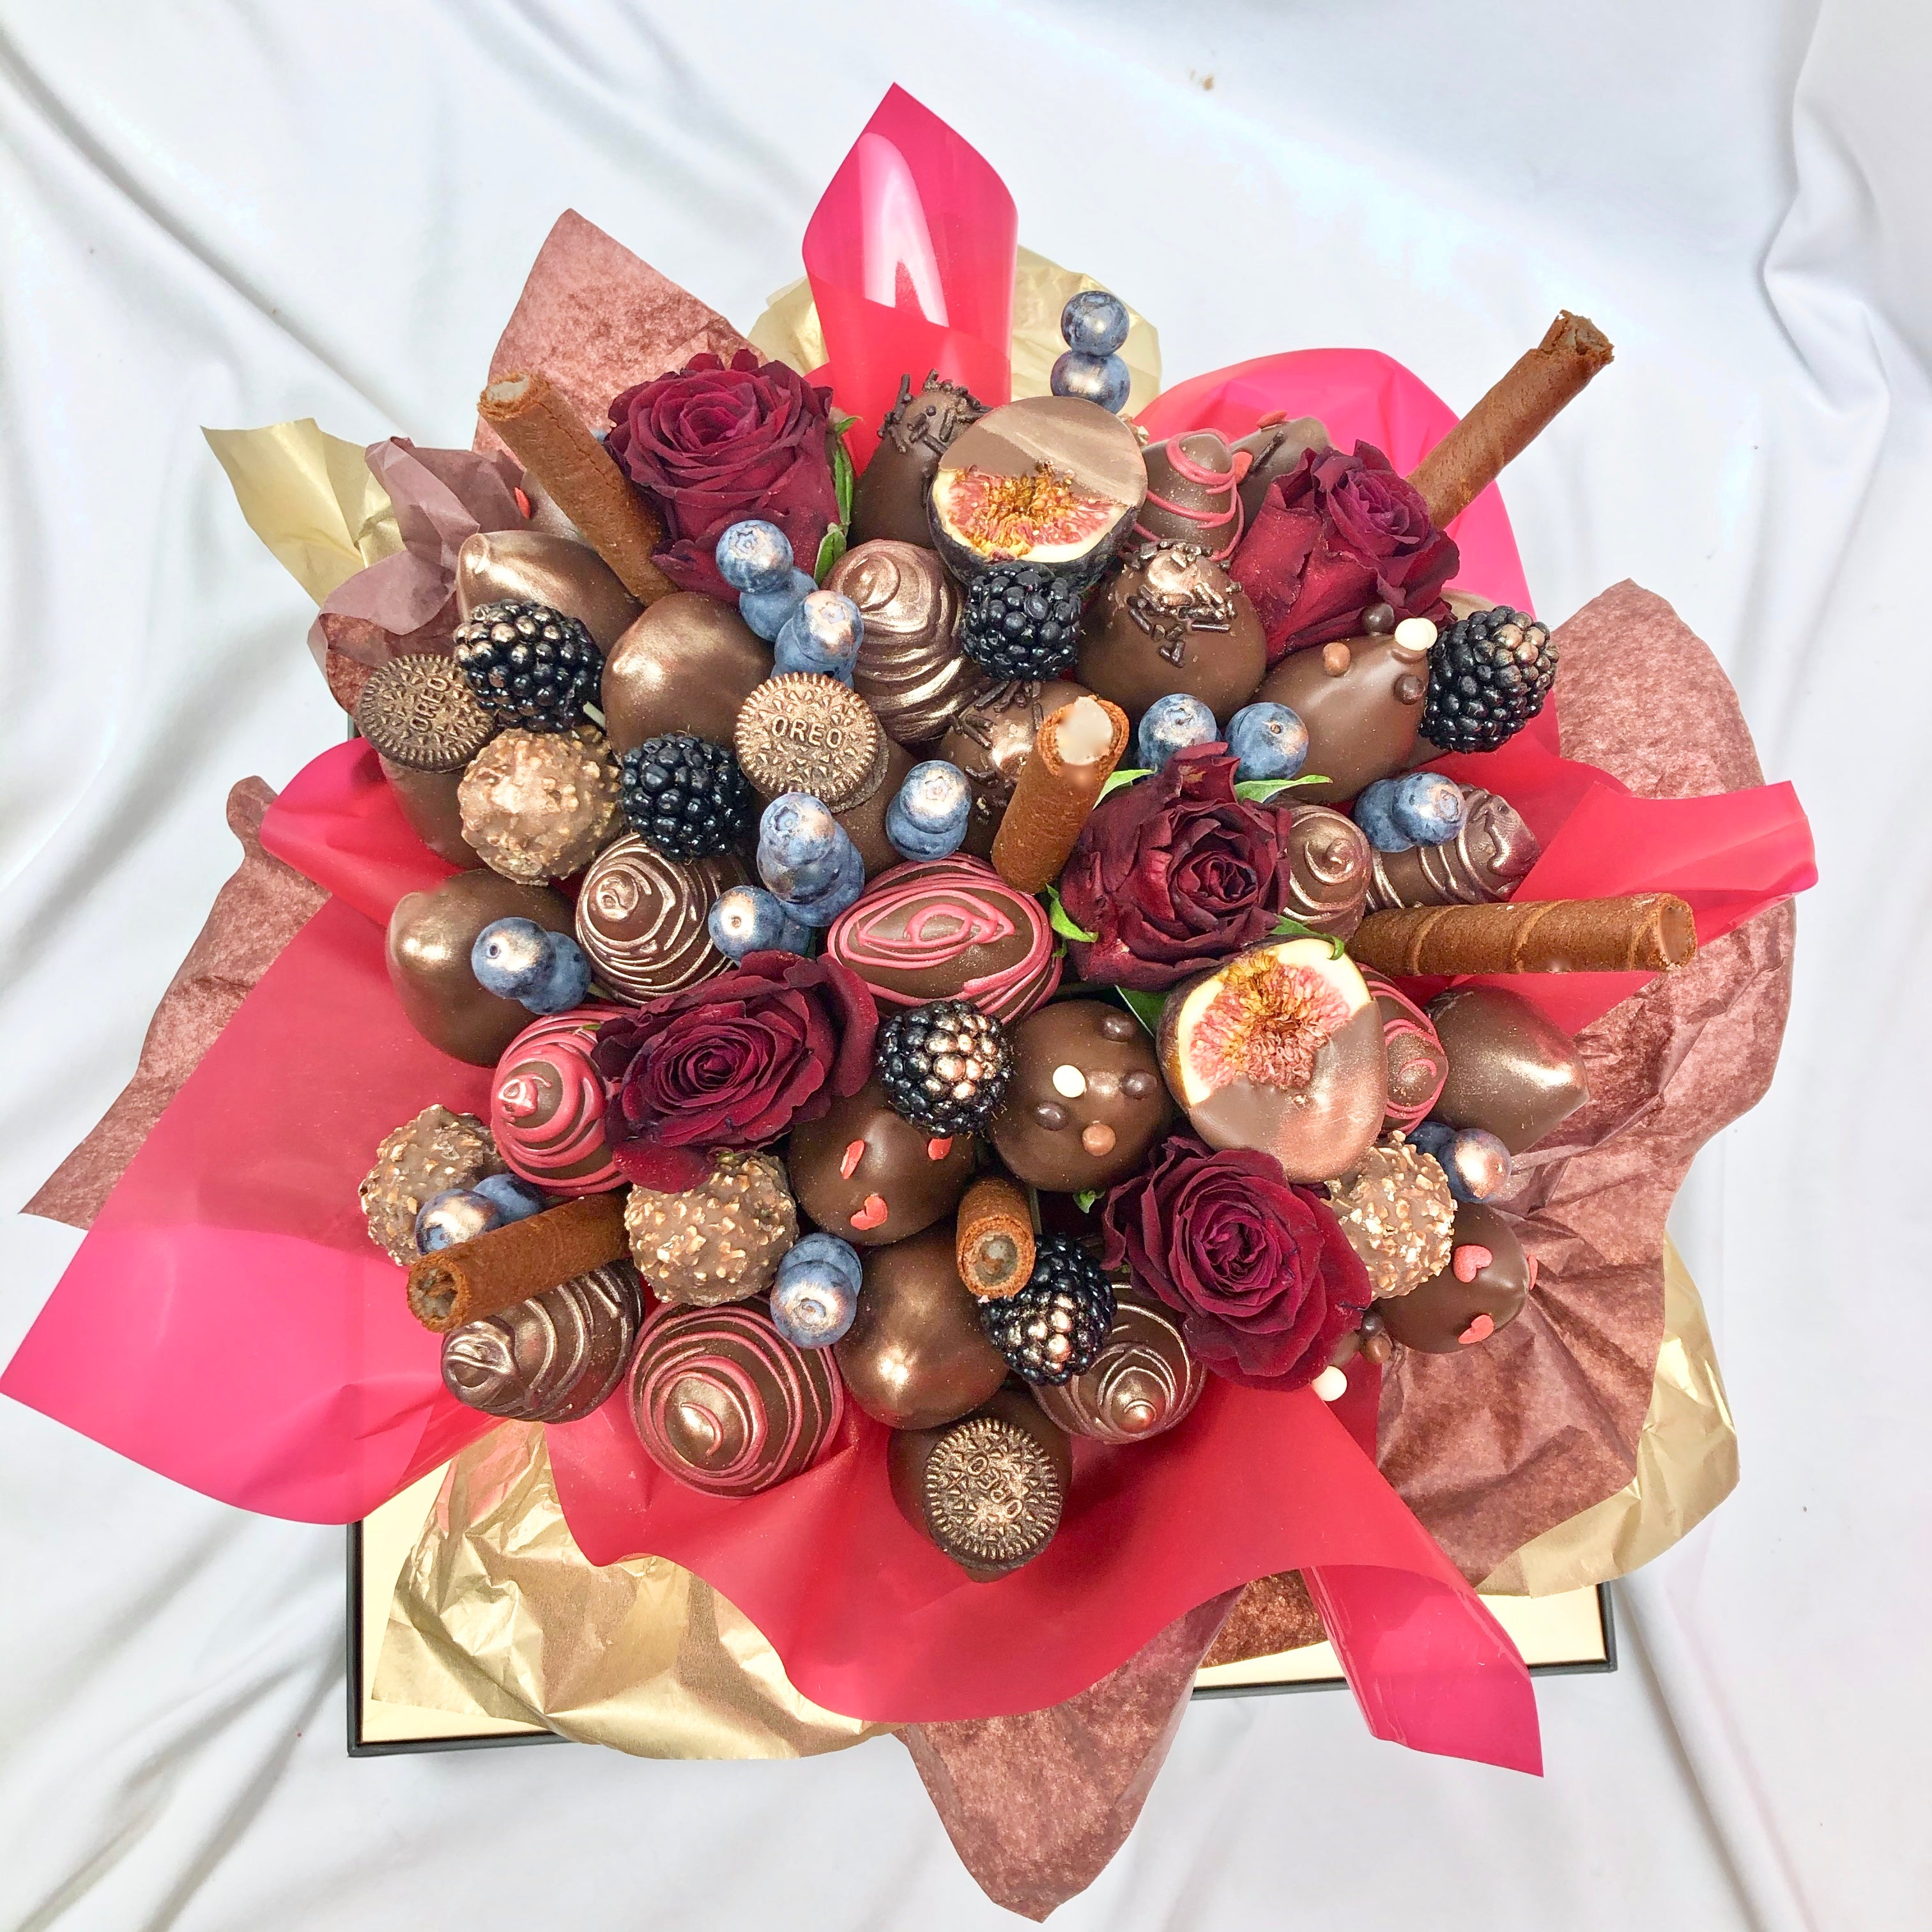 Chocolate covered strawberry bouquet same day delivery order online VIP fast delivery birthday gift for him chocolate's for her